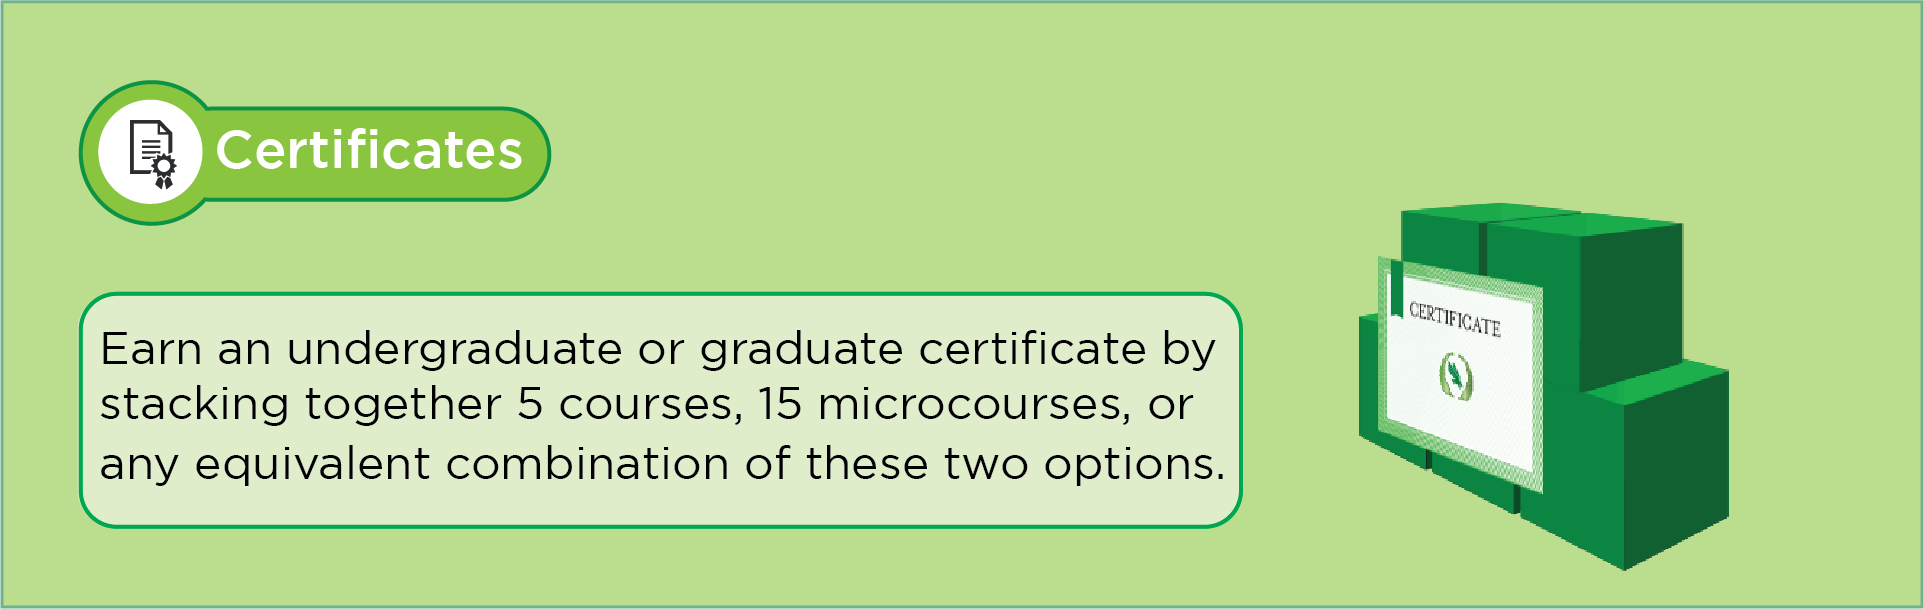 Earn an undergraduate or graduate certificate by stacking together 5 course, 15 microcourses or any equivalent comination of these two options